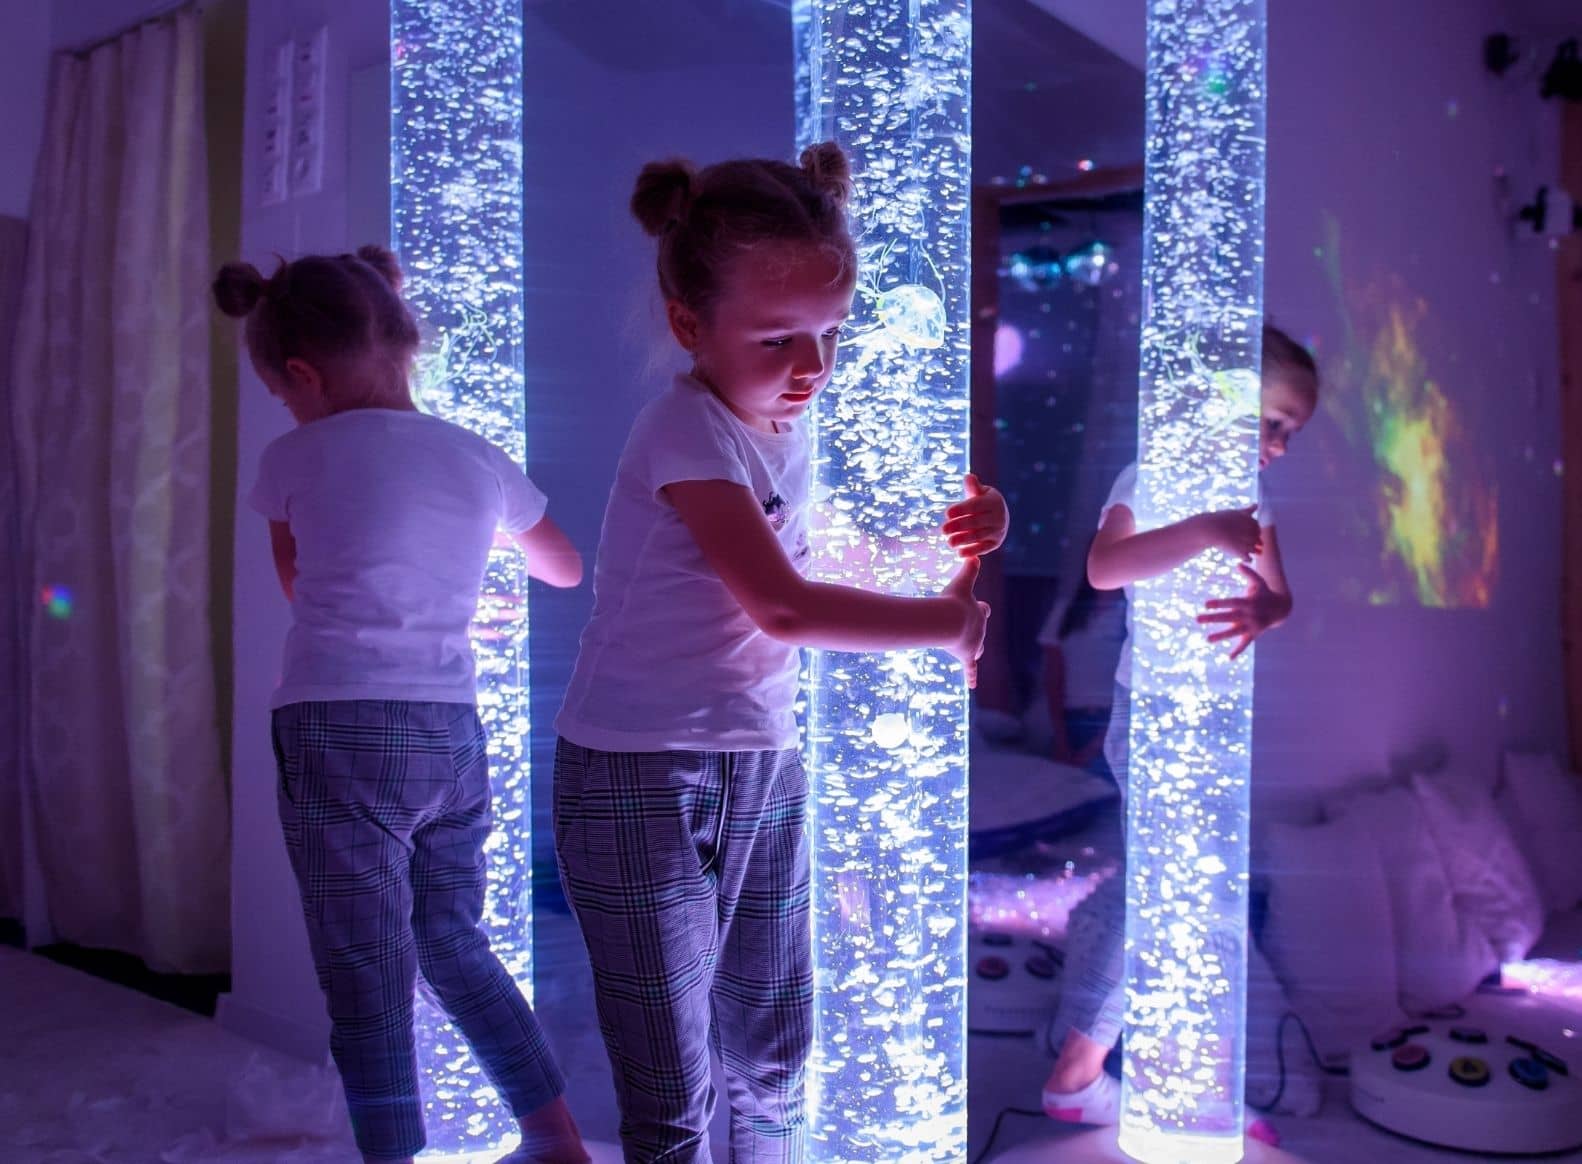 Creating a sensory room or space at school – important questions